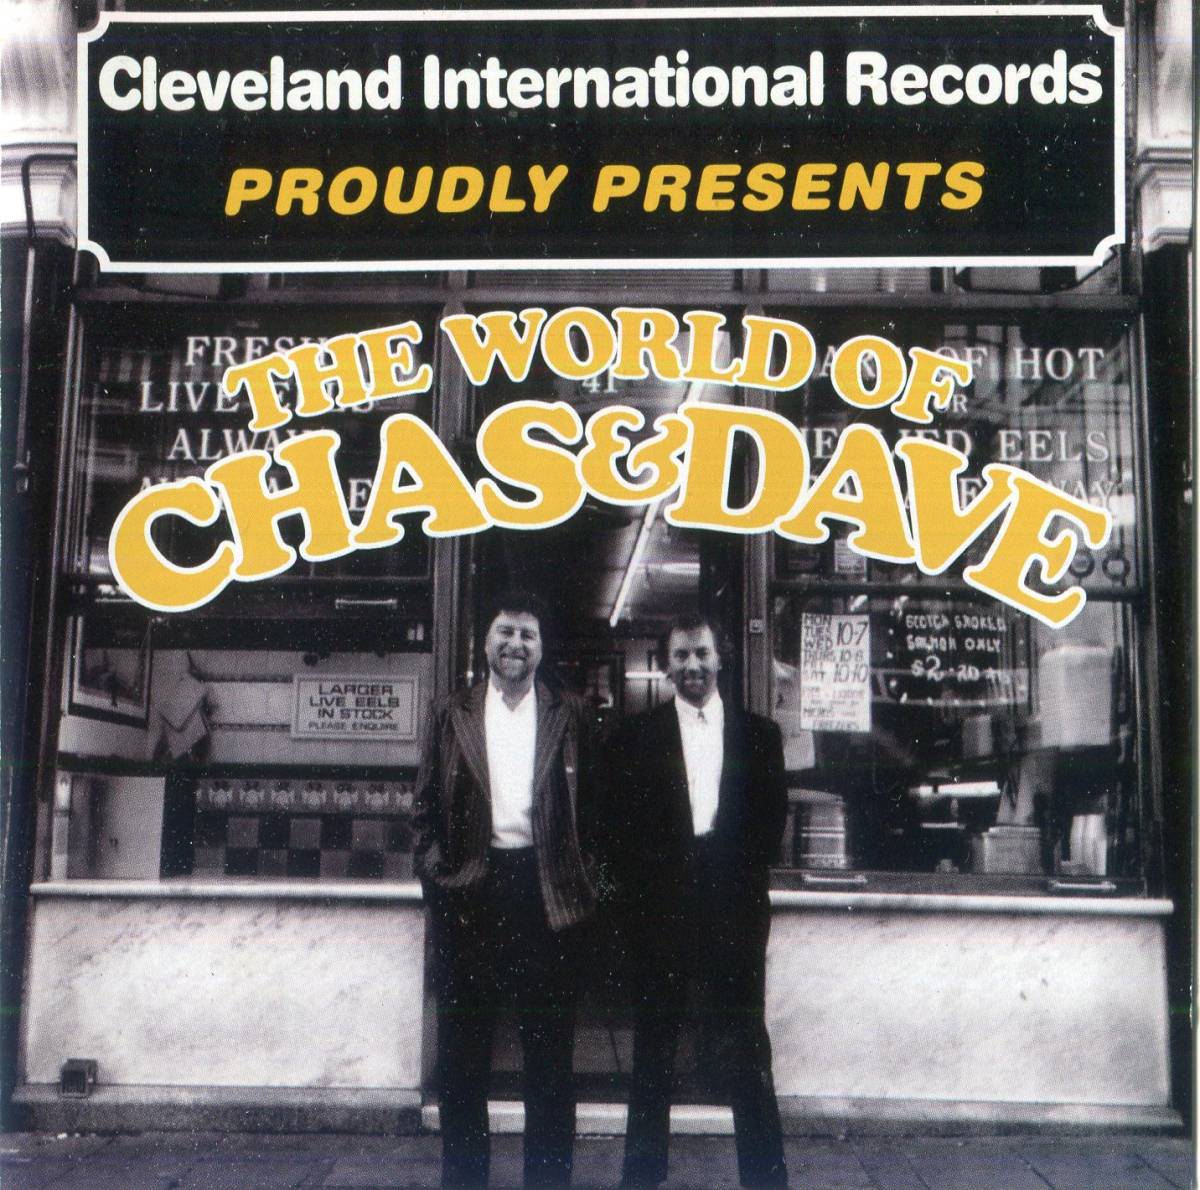 cd CHAS DAVE cleveland 高価値セリー international records proudly chas of world  dave the presents